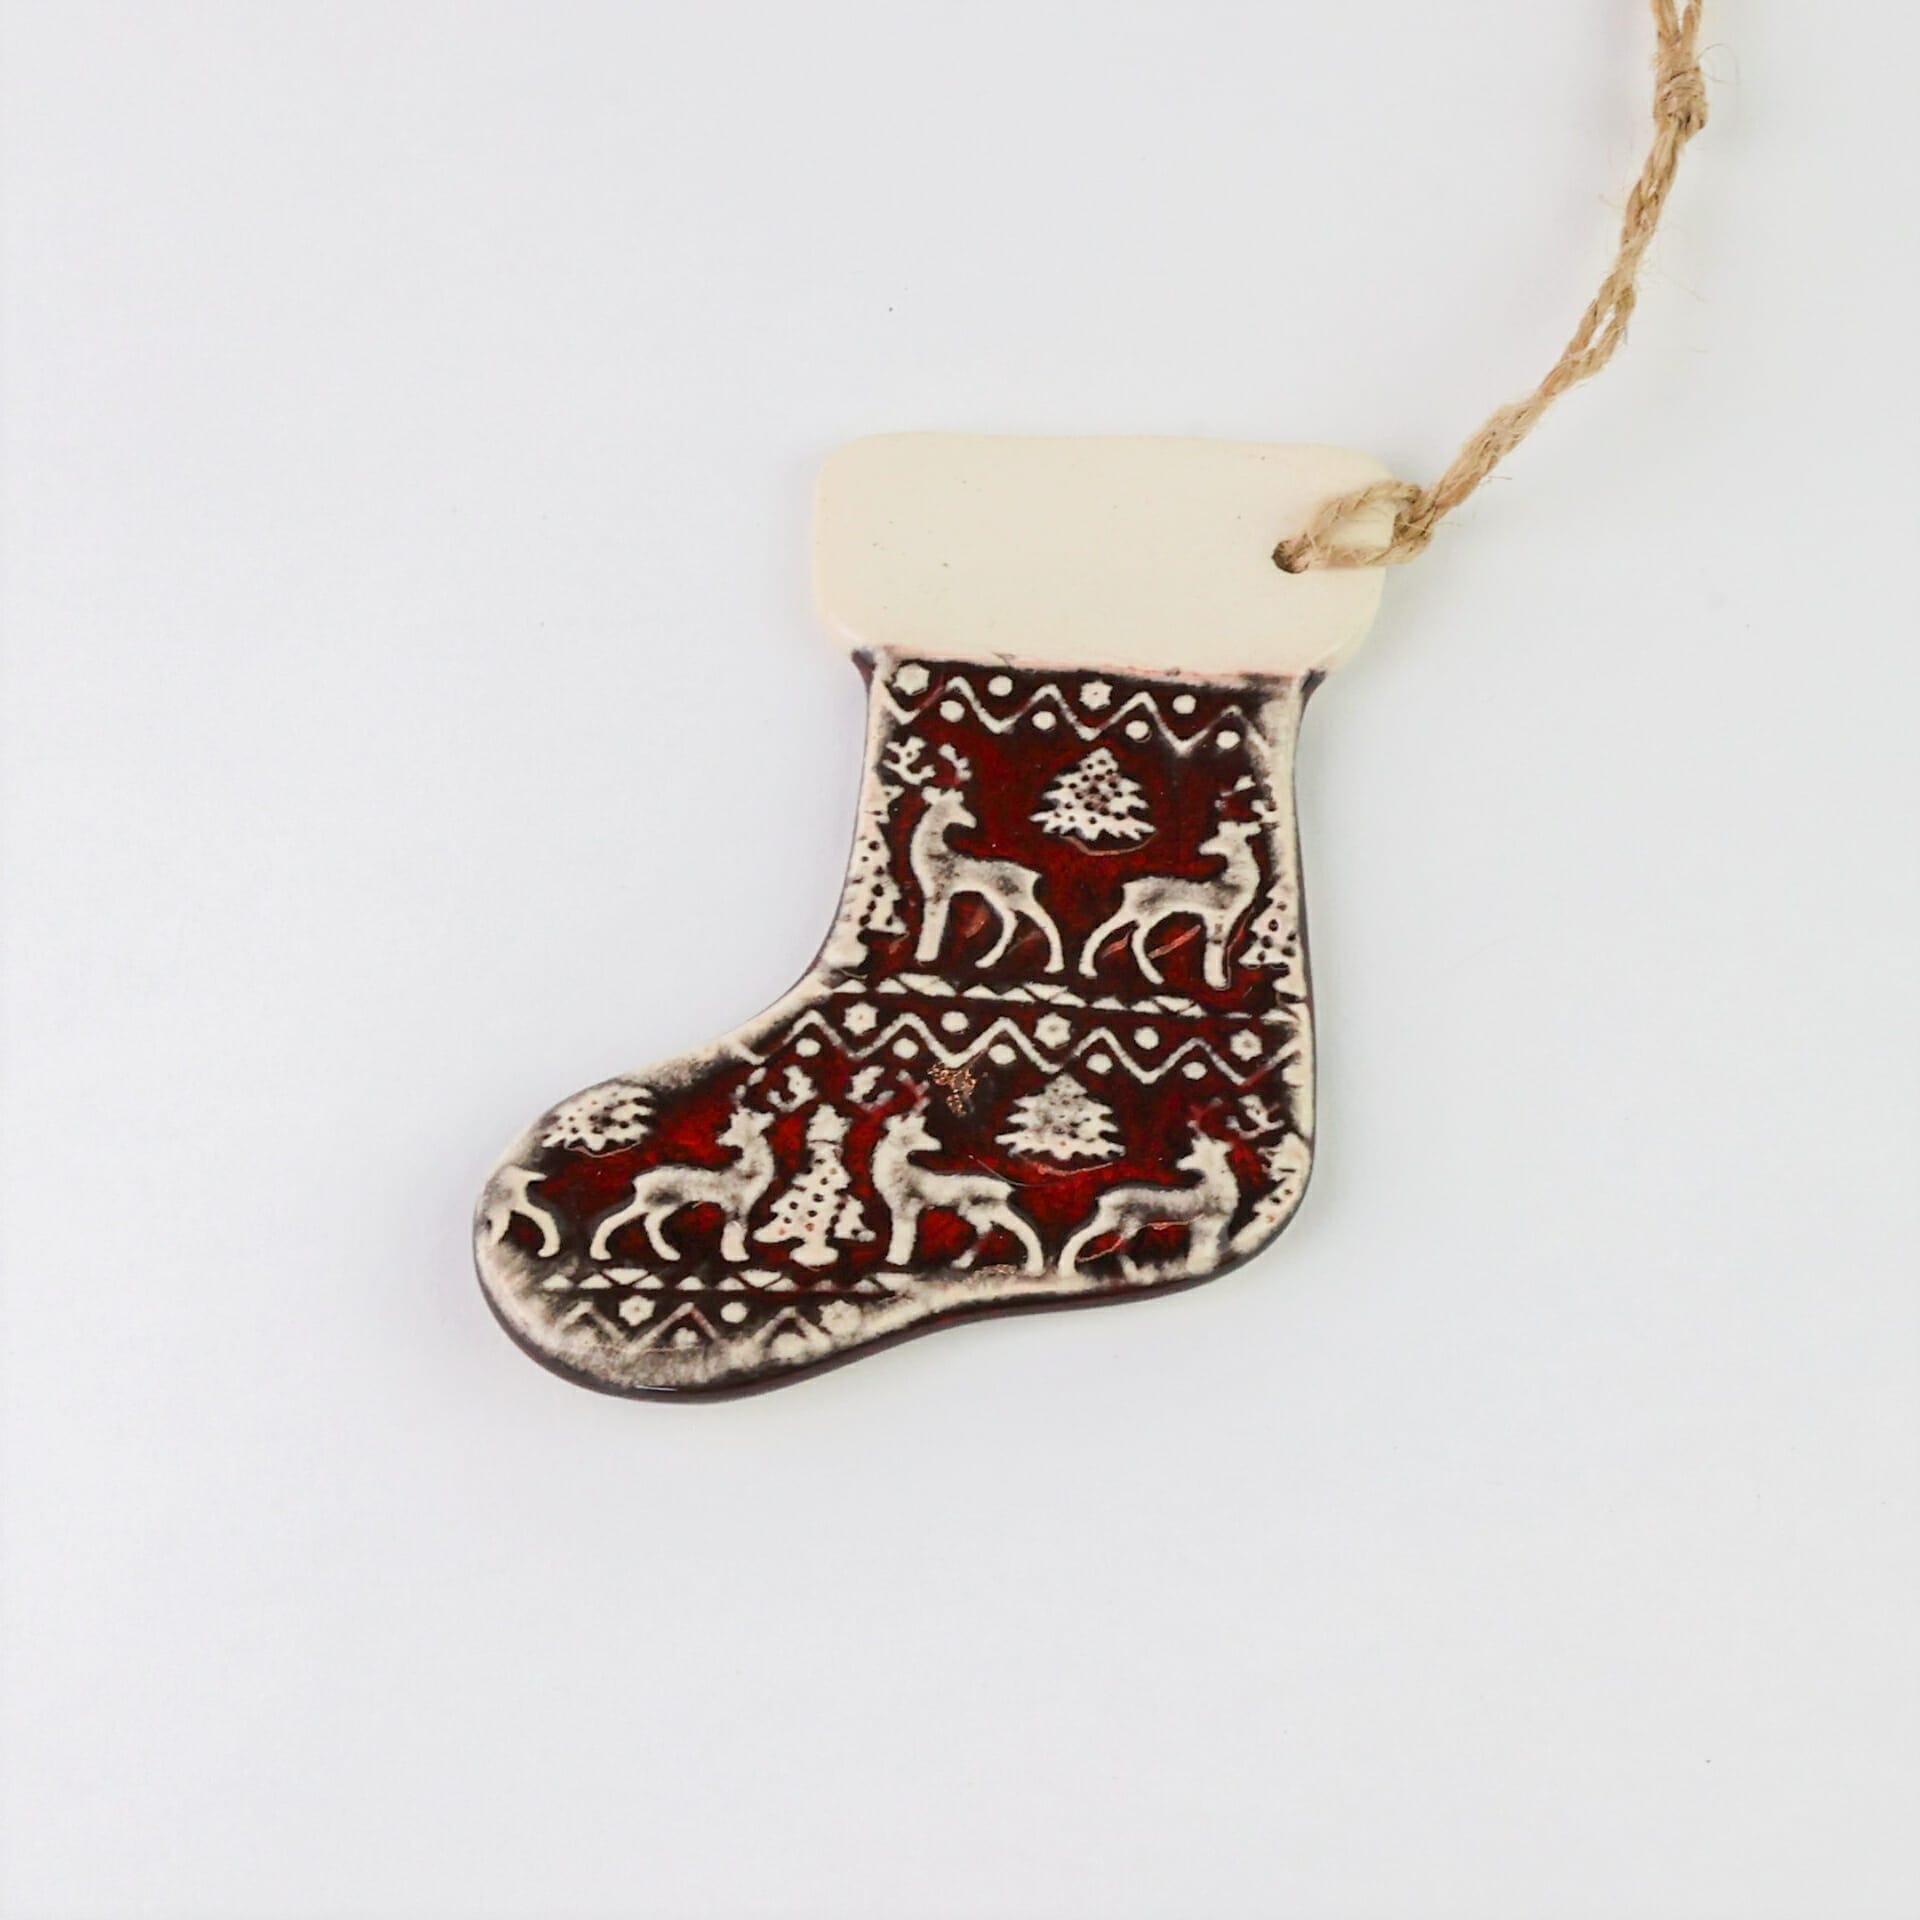 This stocking custom ornament is made by women transitioning from homelessness and poverty.